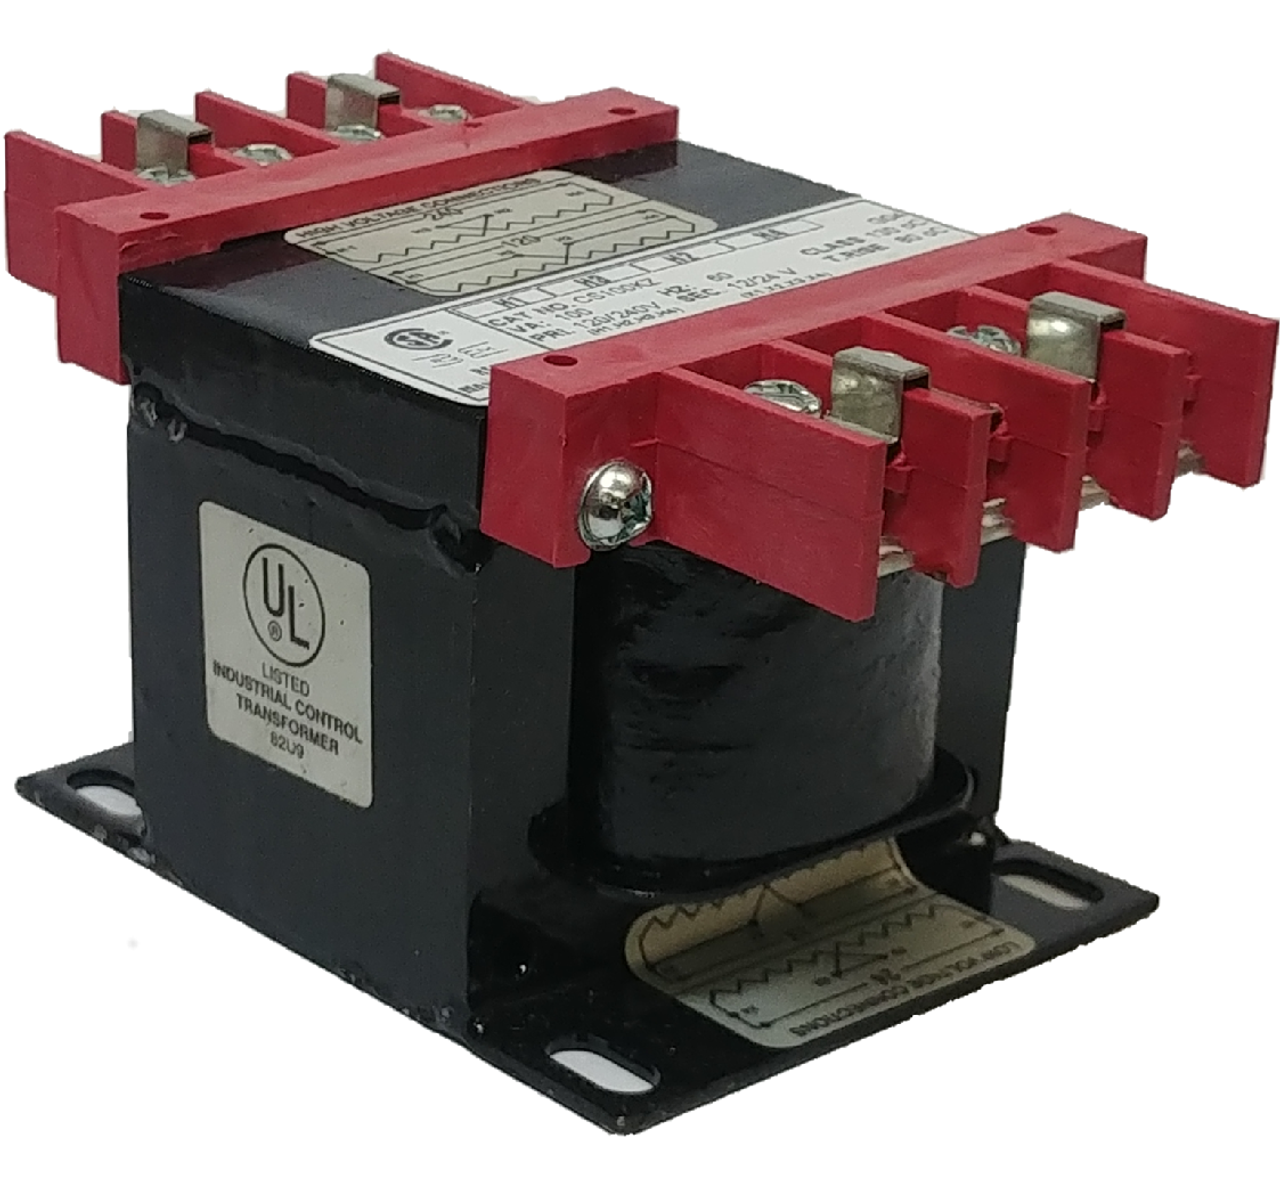 Standard industrial control transformer with open windings